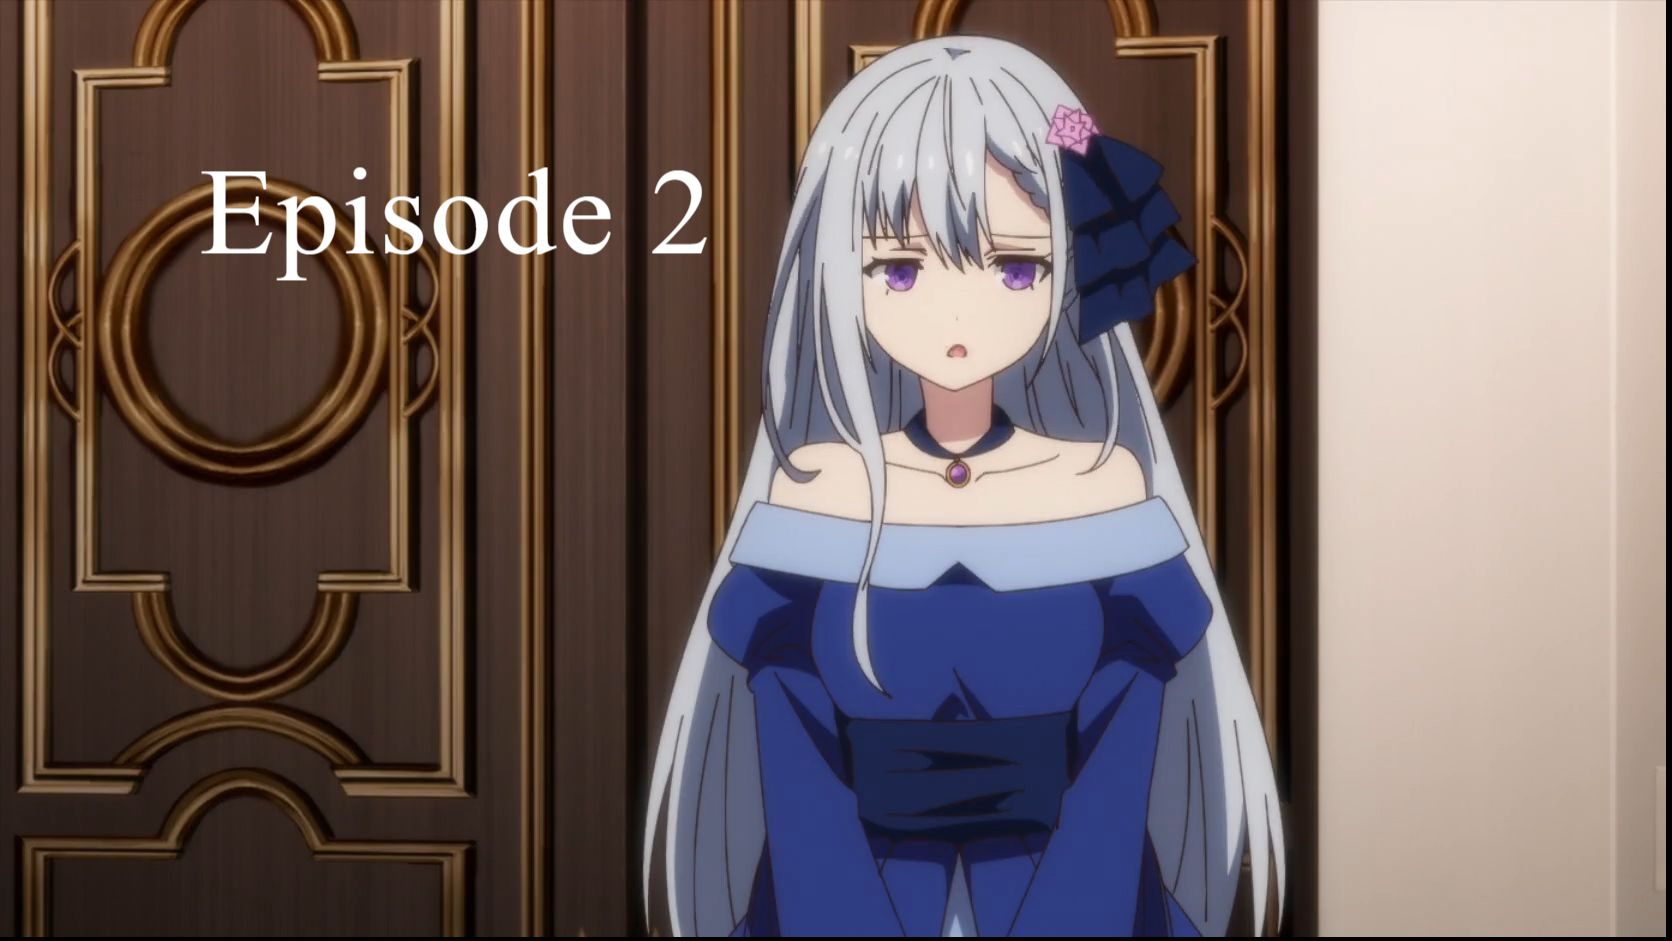 Episode 2  The Magical Revolution of the Reincarnated Princess